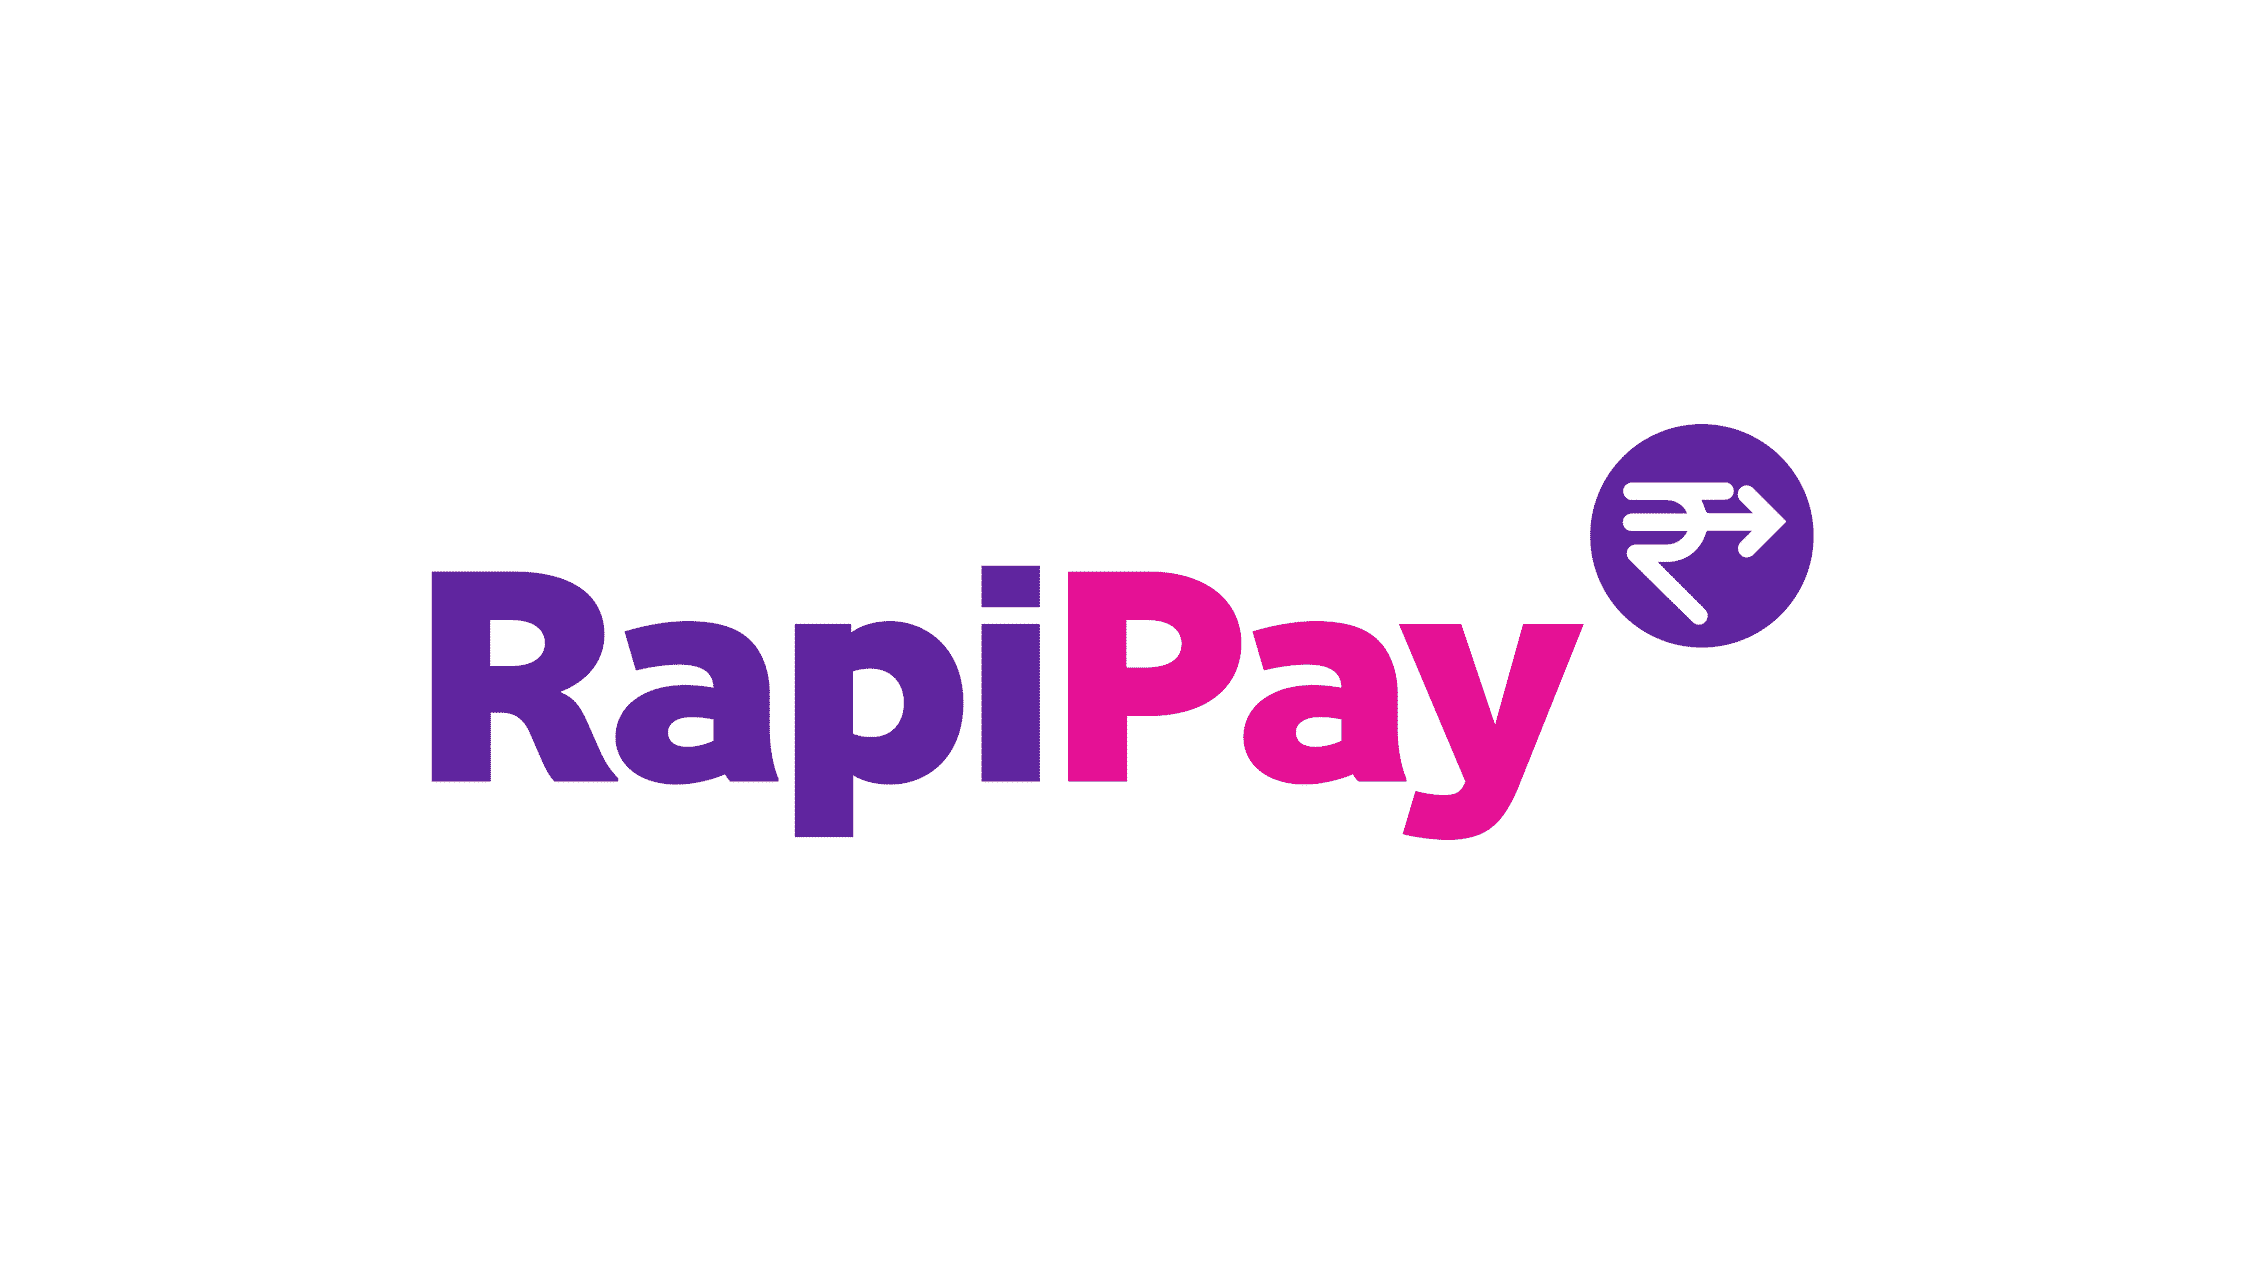 RapiPay to facilitate COVID-19 vaccination search and registration through portal and app